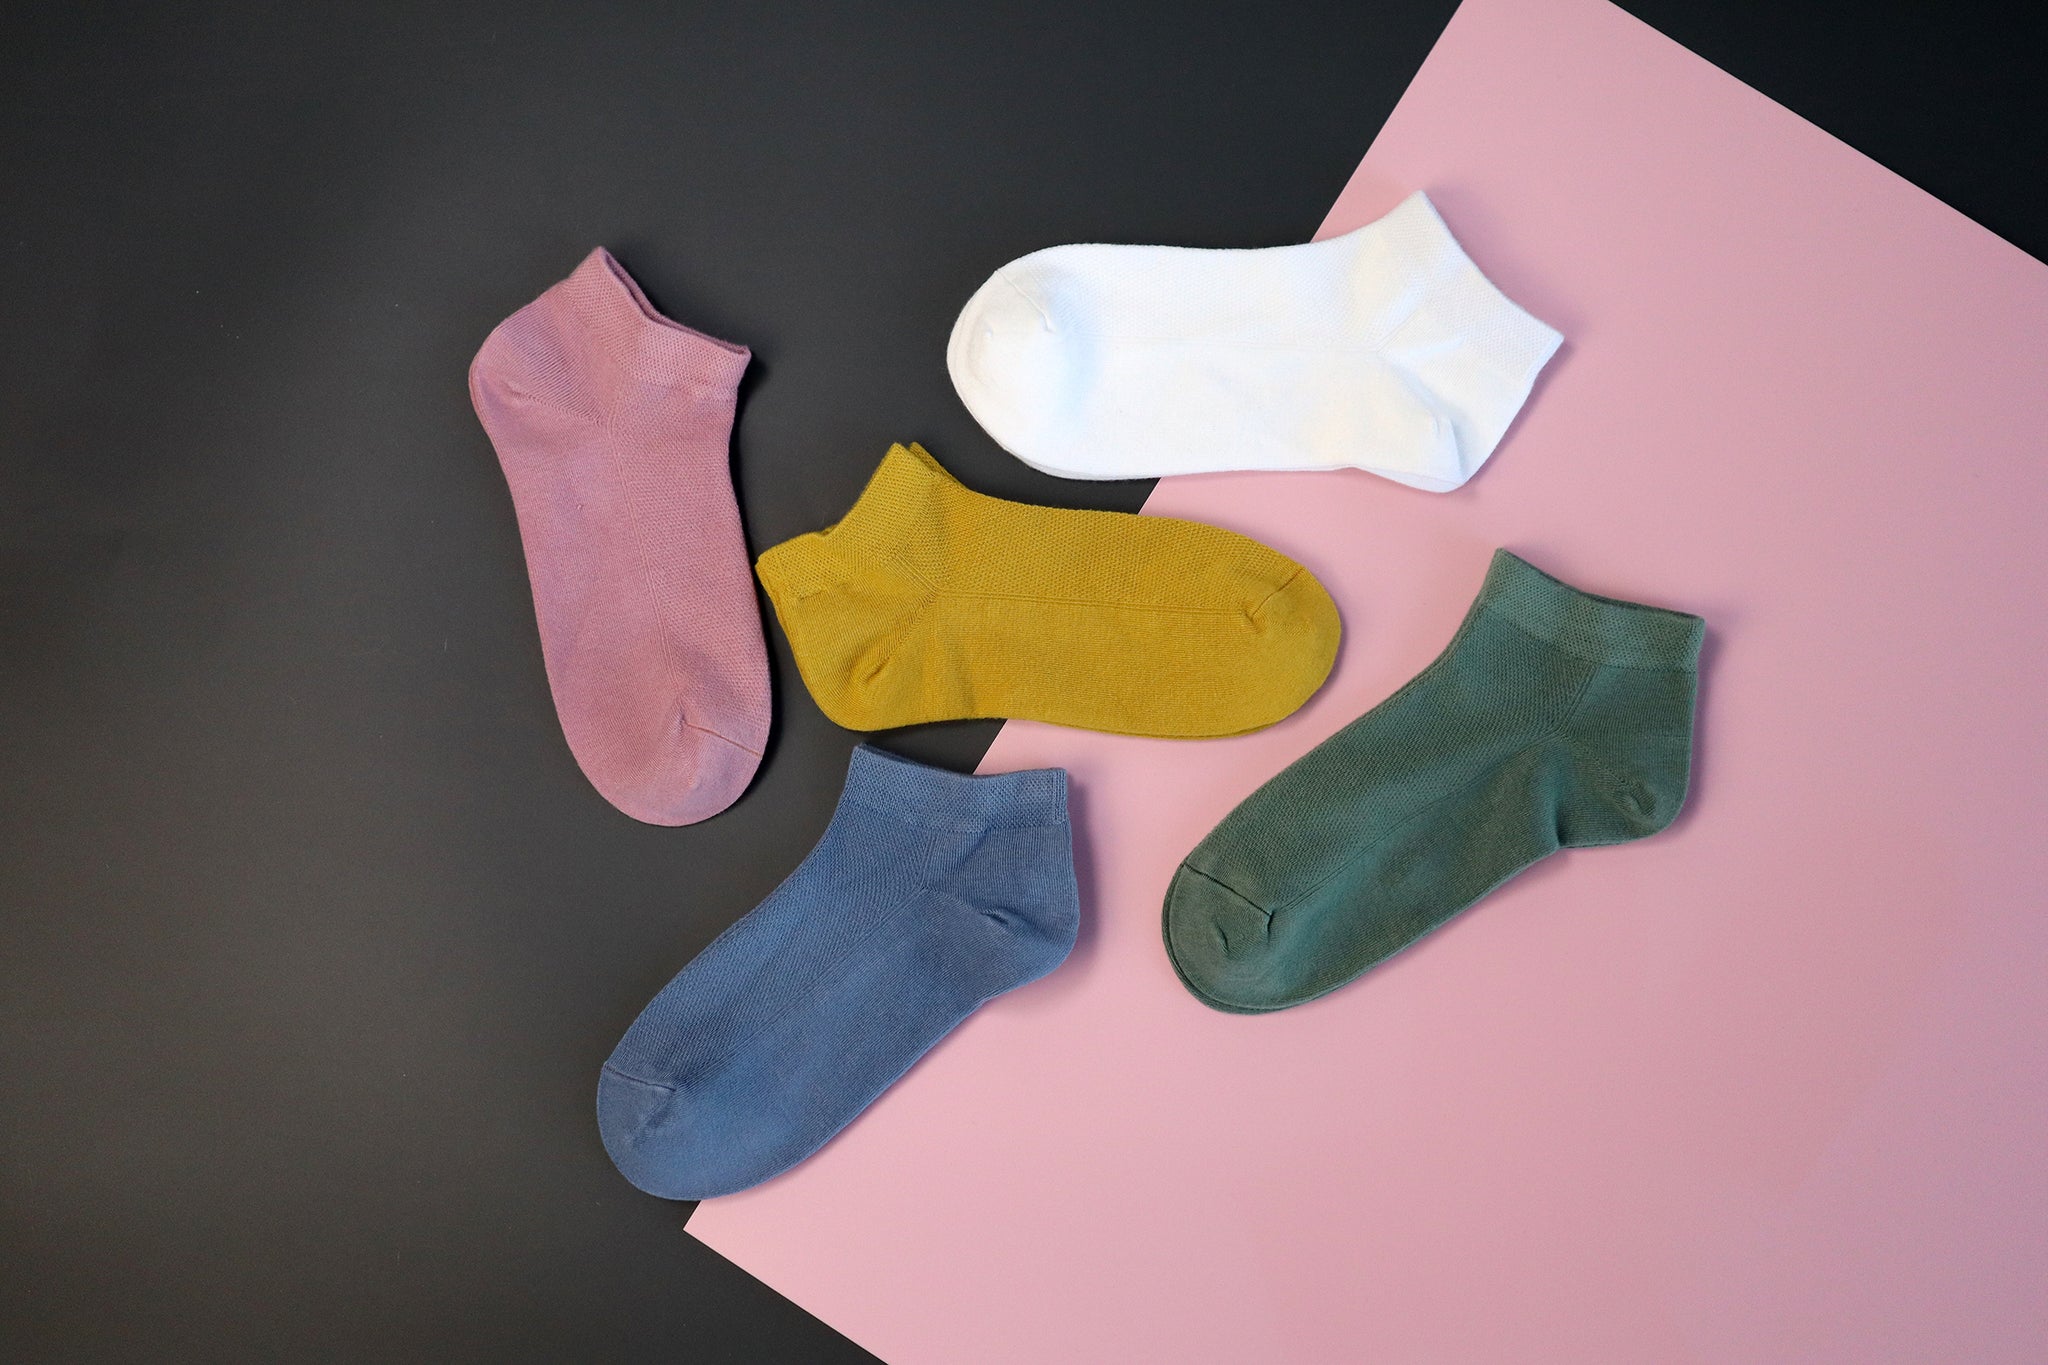 Sock Sizing - A guide to finding your size